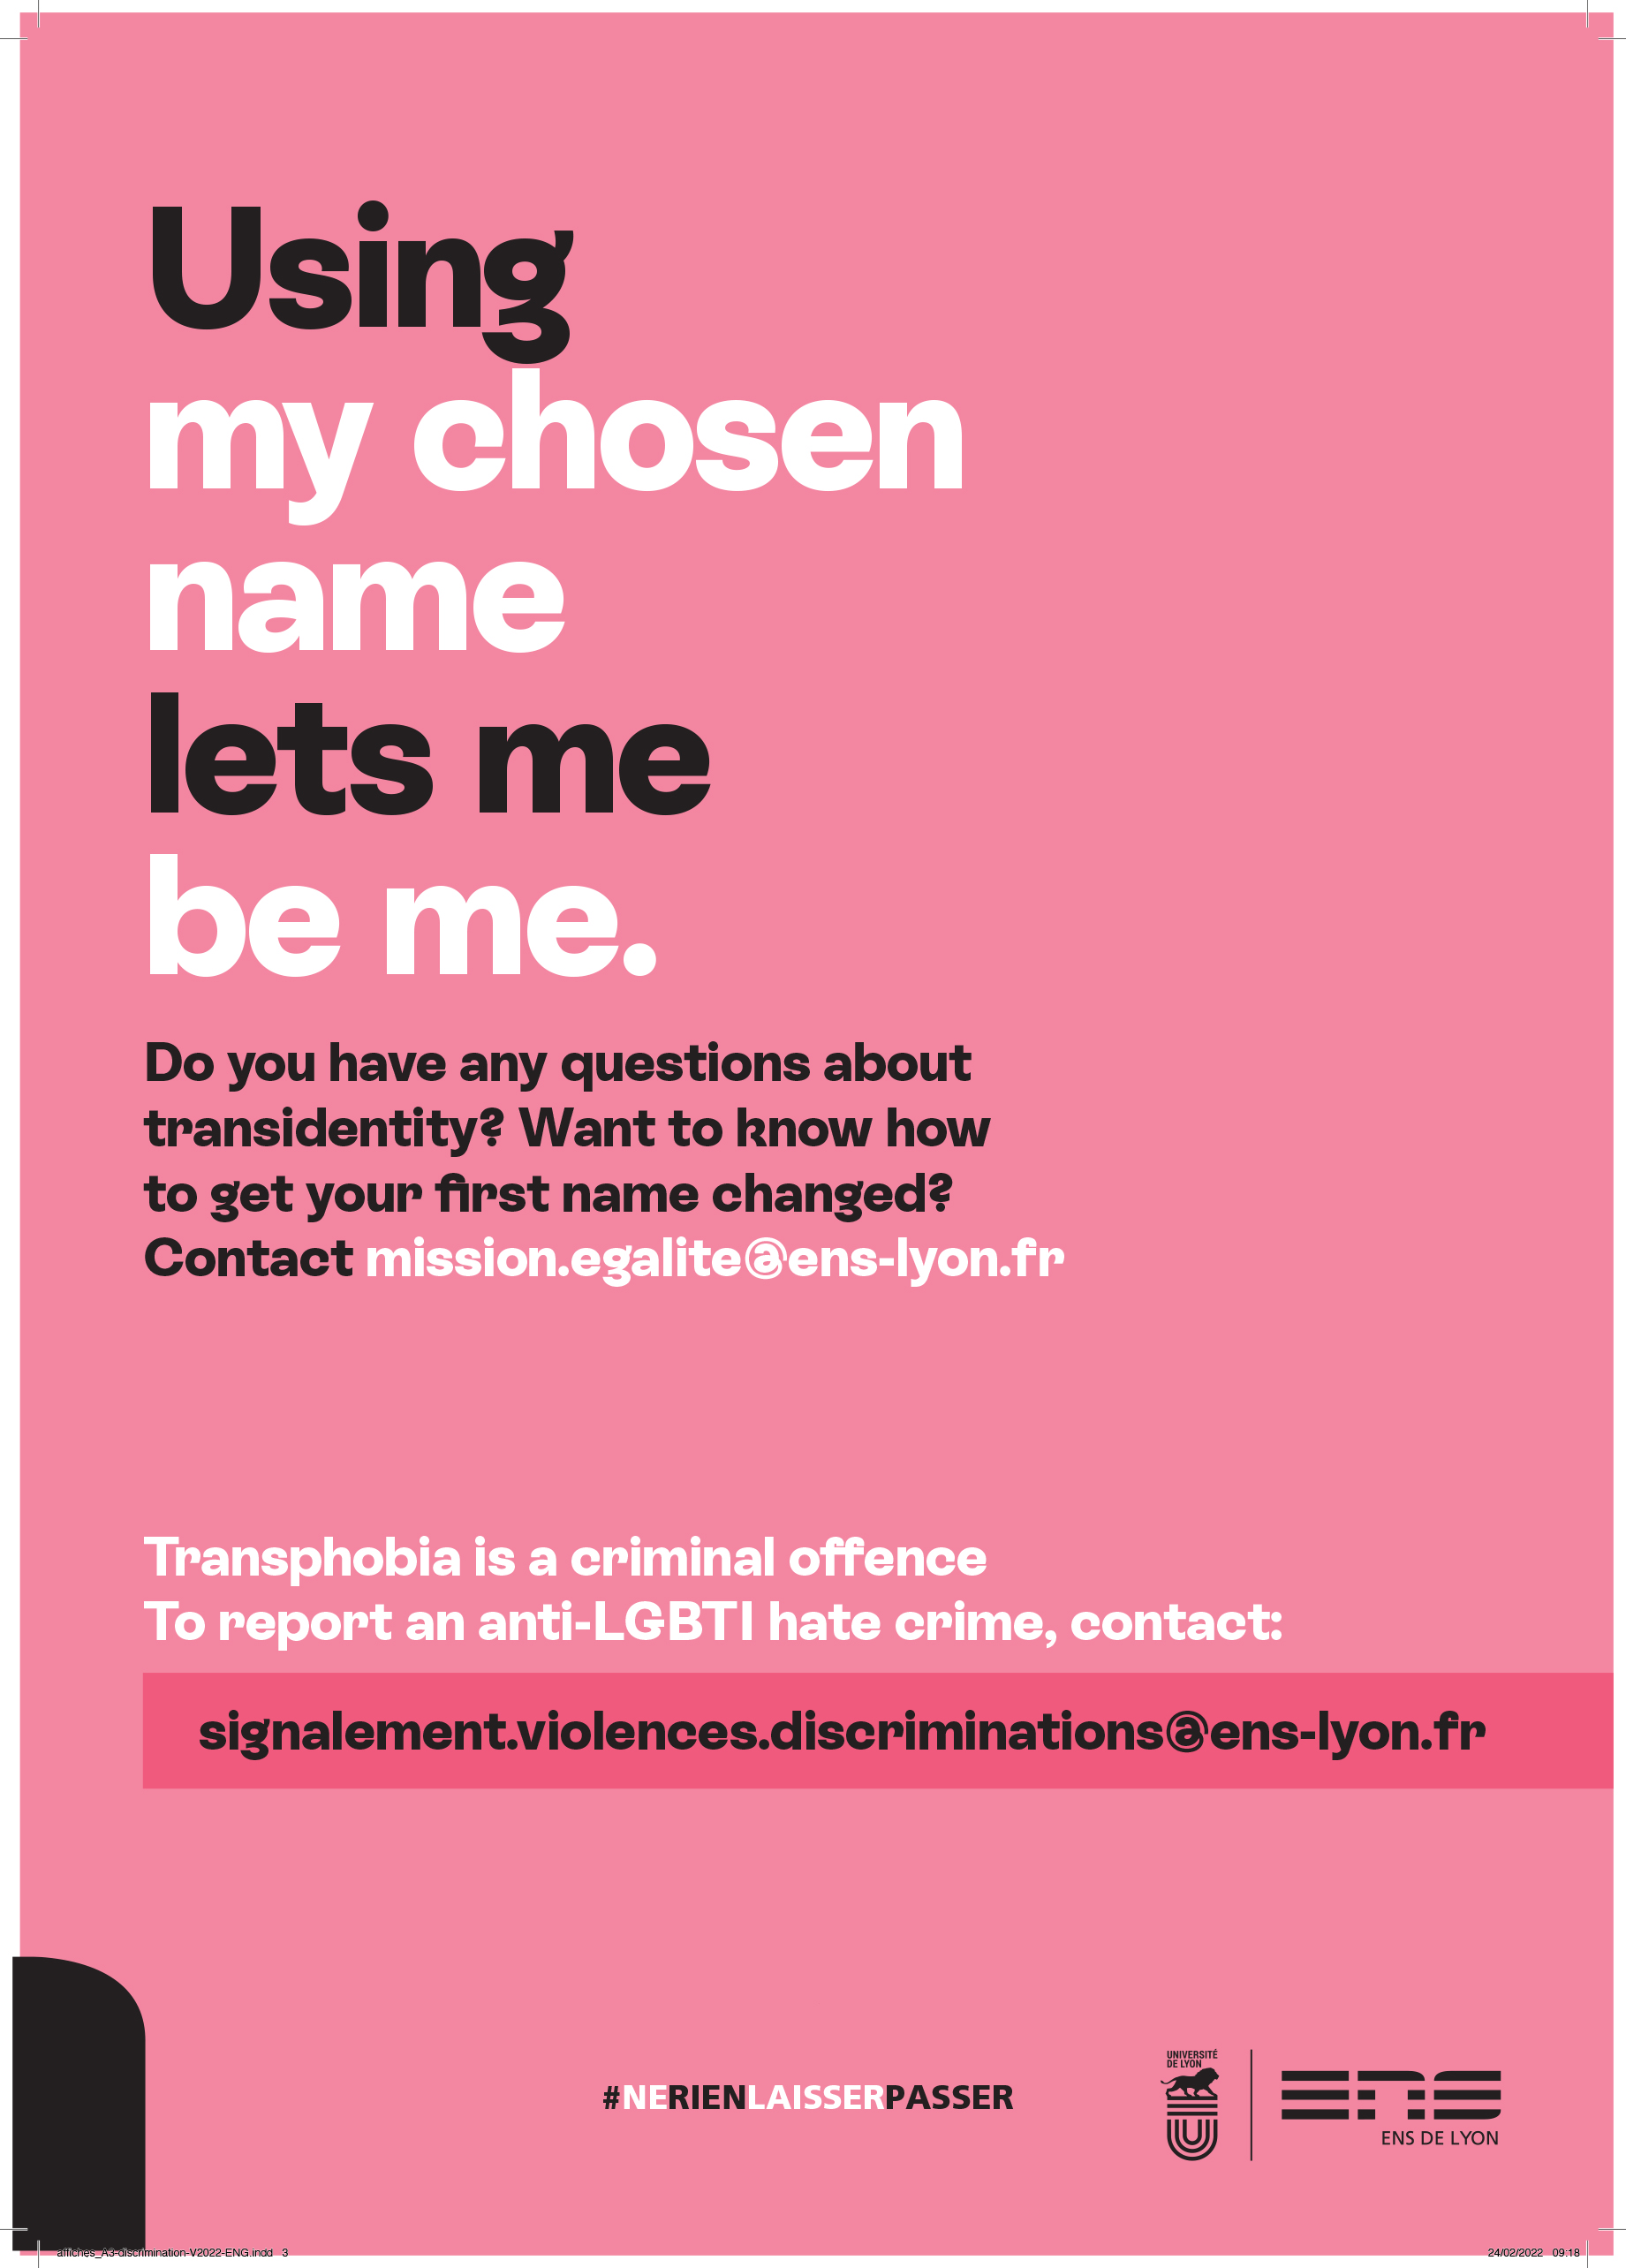 Using my chosen name lets me be me. Transphobia is a criminal offence